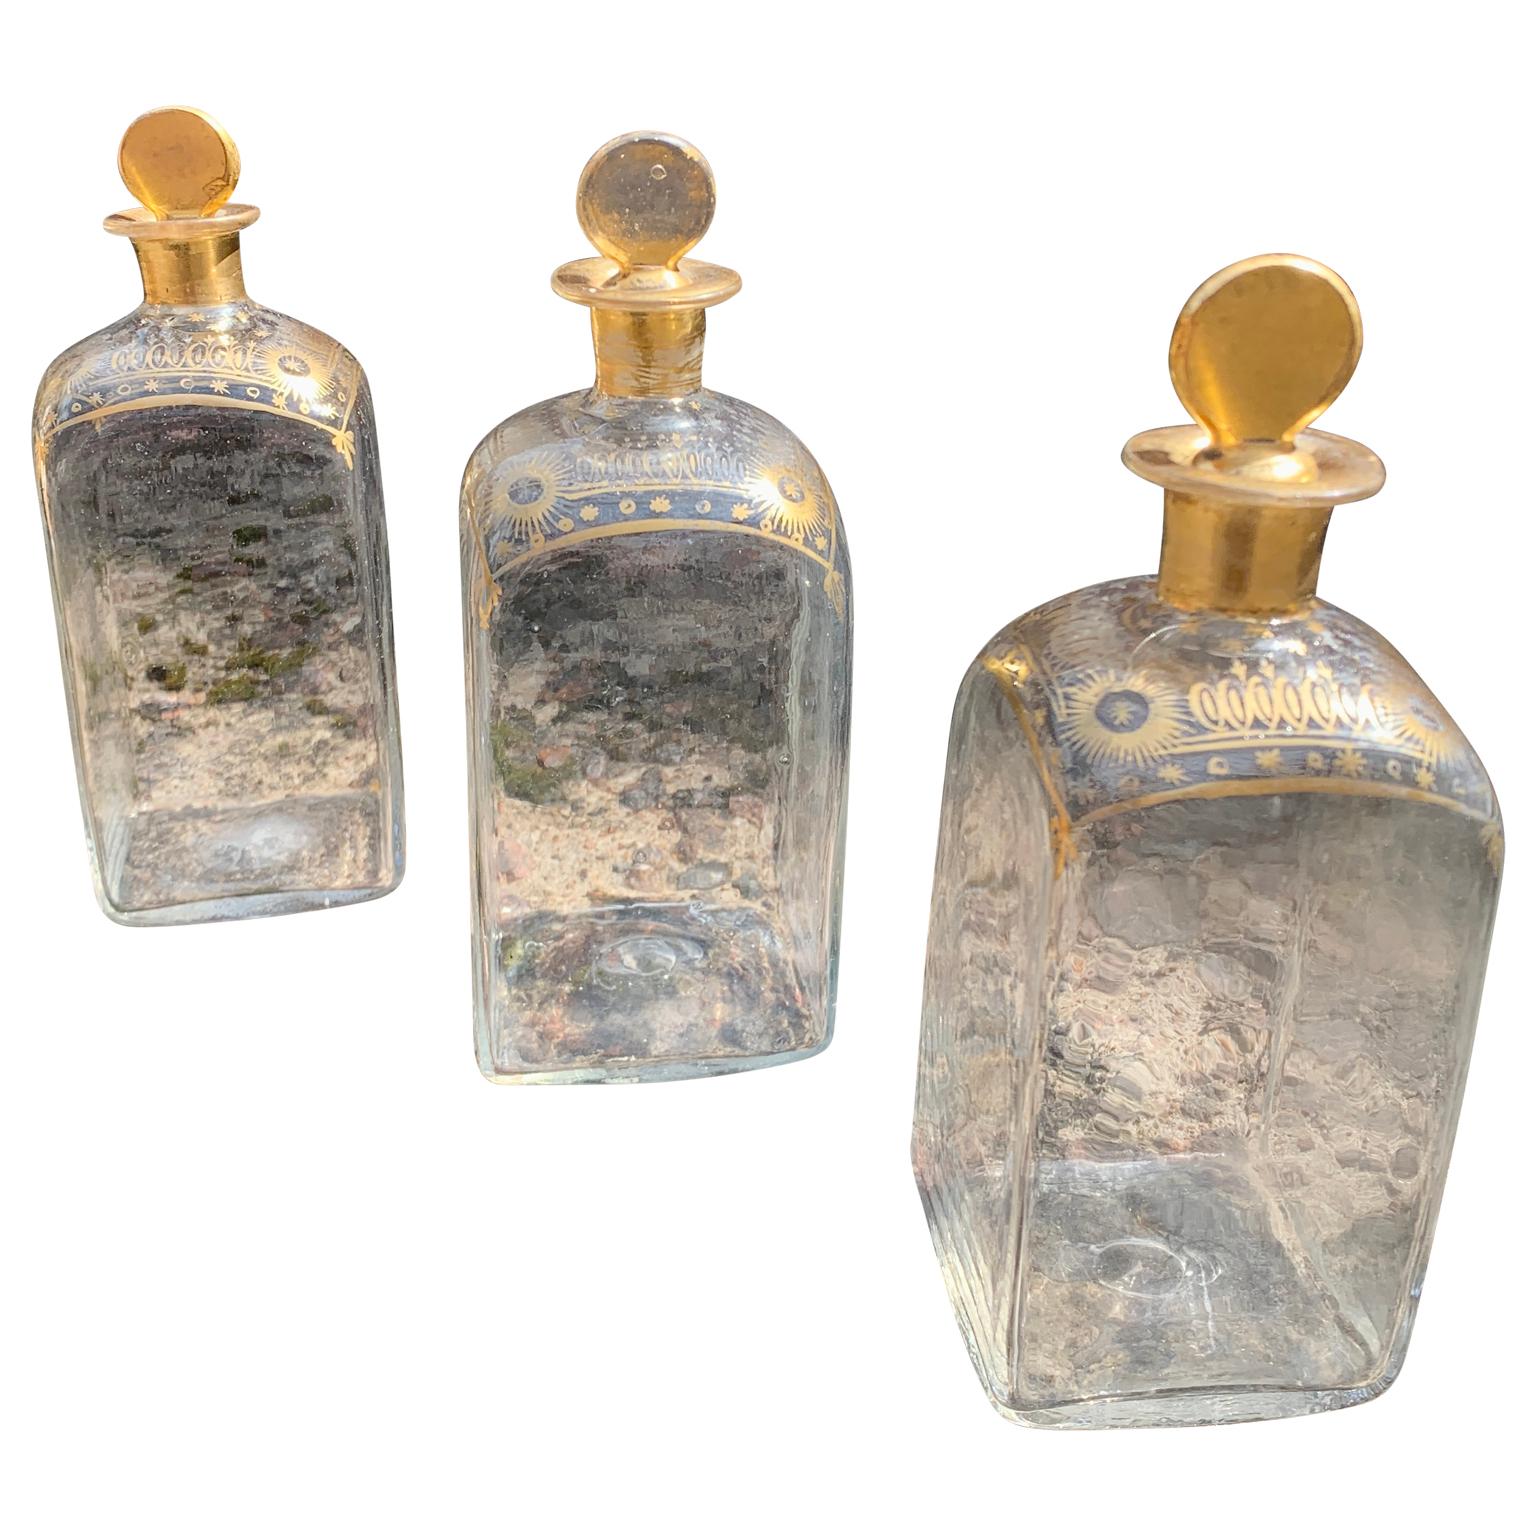 A set of three French hand made (hand blown) liquor decanters or bottles with the original glass corks. These French transparent glass and antique pieces from the very early part of the 19th Century, are hand-painted all around with gold enamel